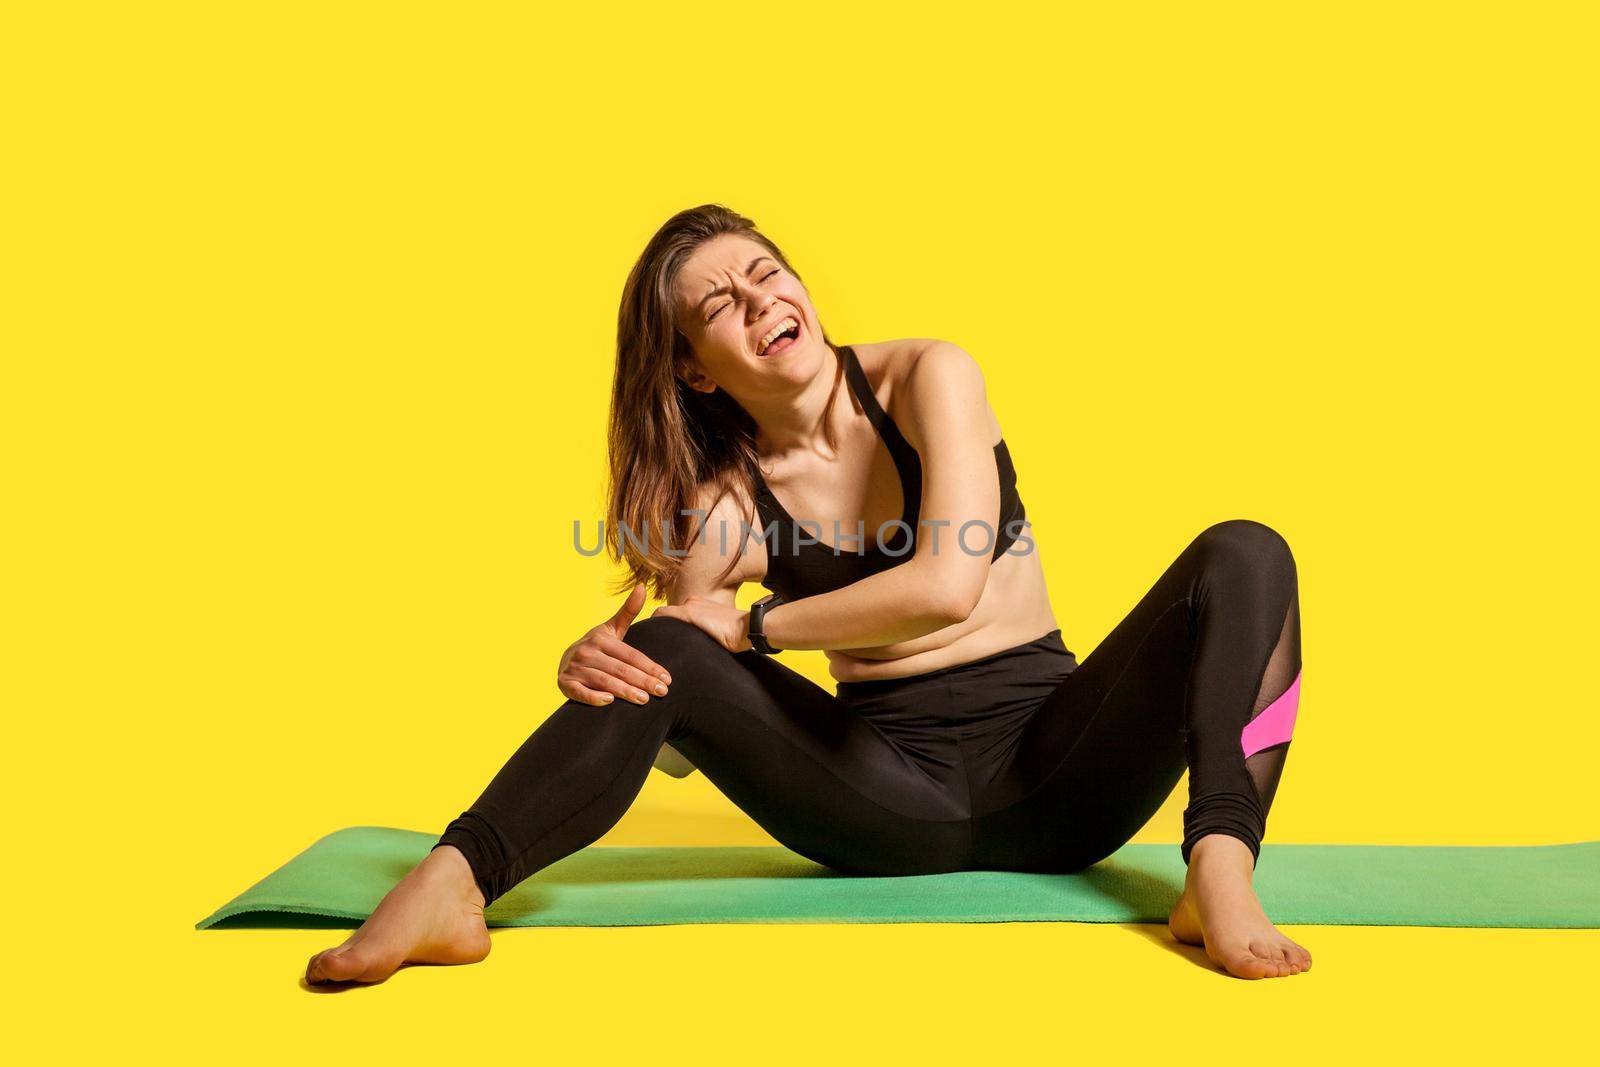 Sportswoman shouting from knee pain, sitting on gym mat, touching leg suffering joint injury after workout, muscle strain, hurting to move sprained ligaments. studio shot isolated on yellow background